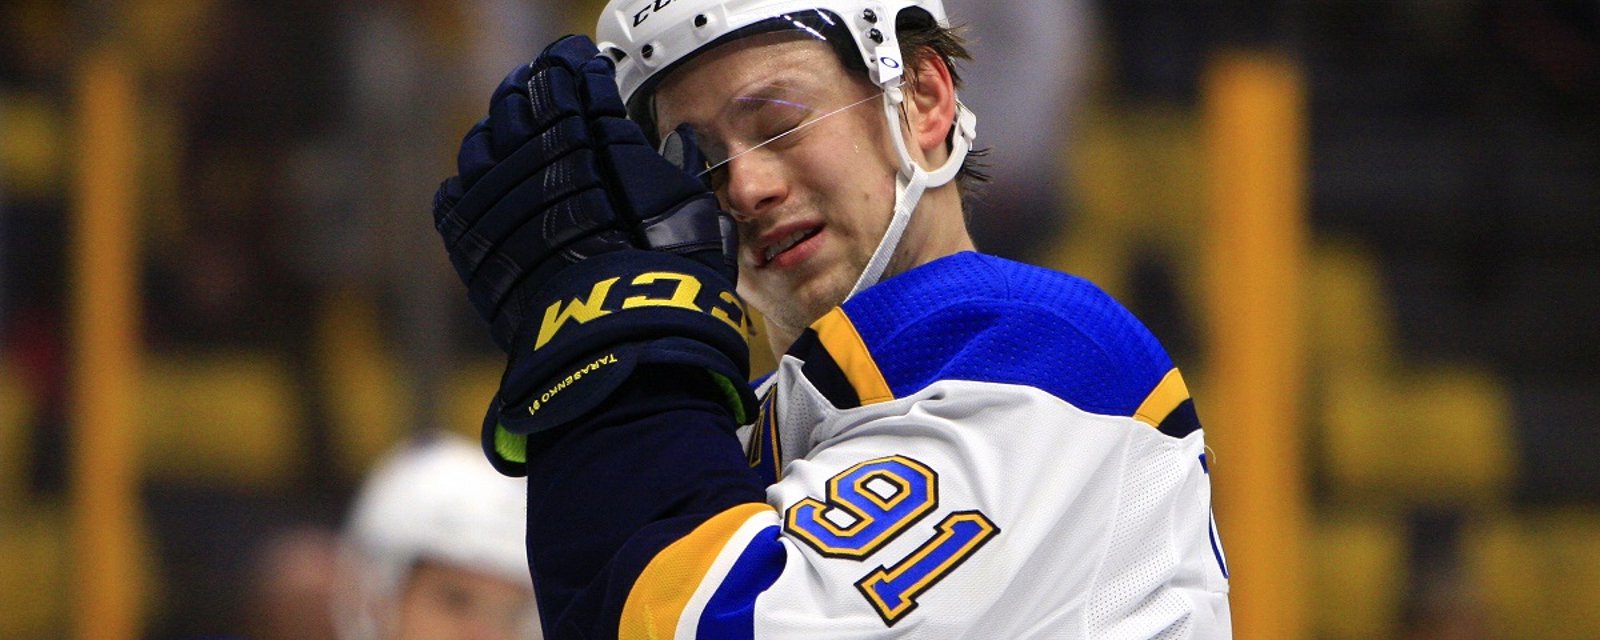 Blues confirm Tarasenko has been injured and will be out for a while.